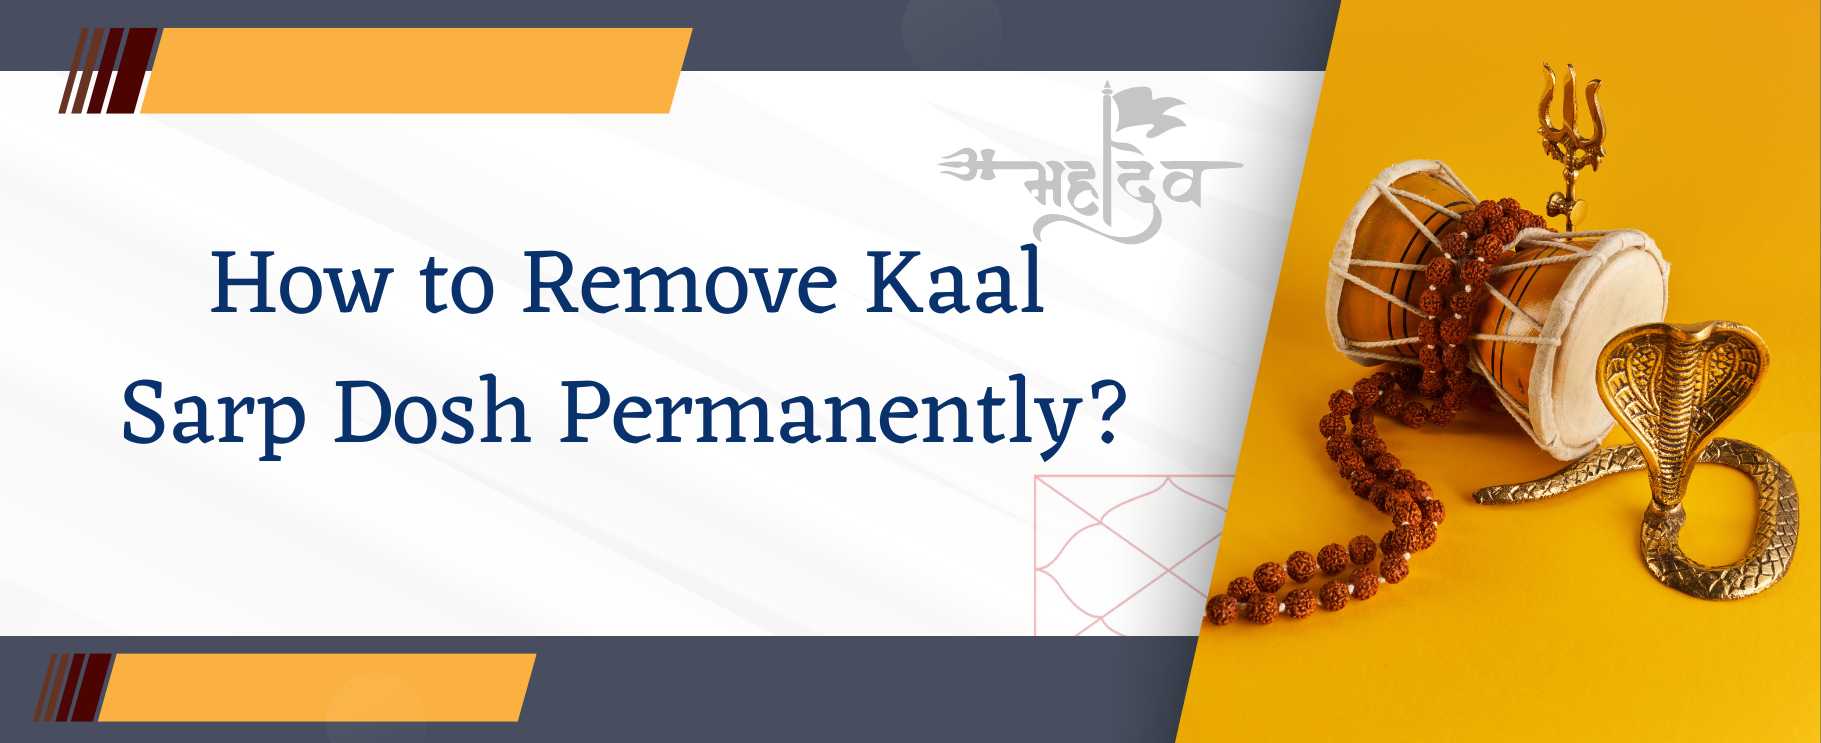 How-to-remove-kaal-sarp-dosh-permanently